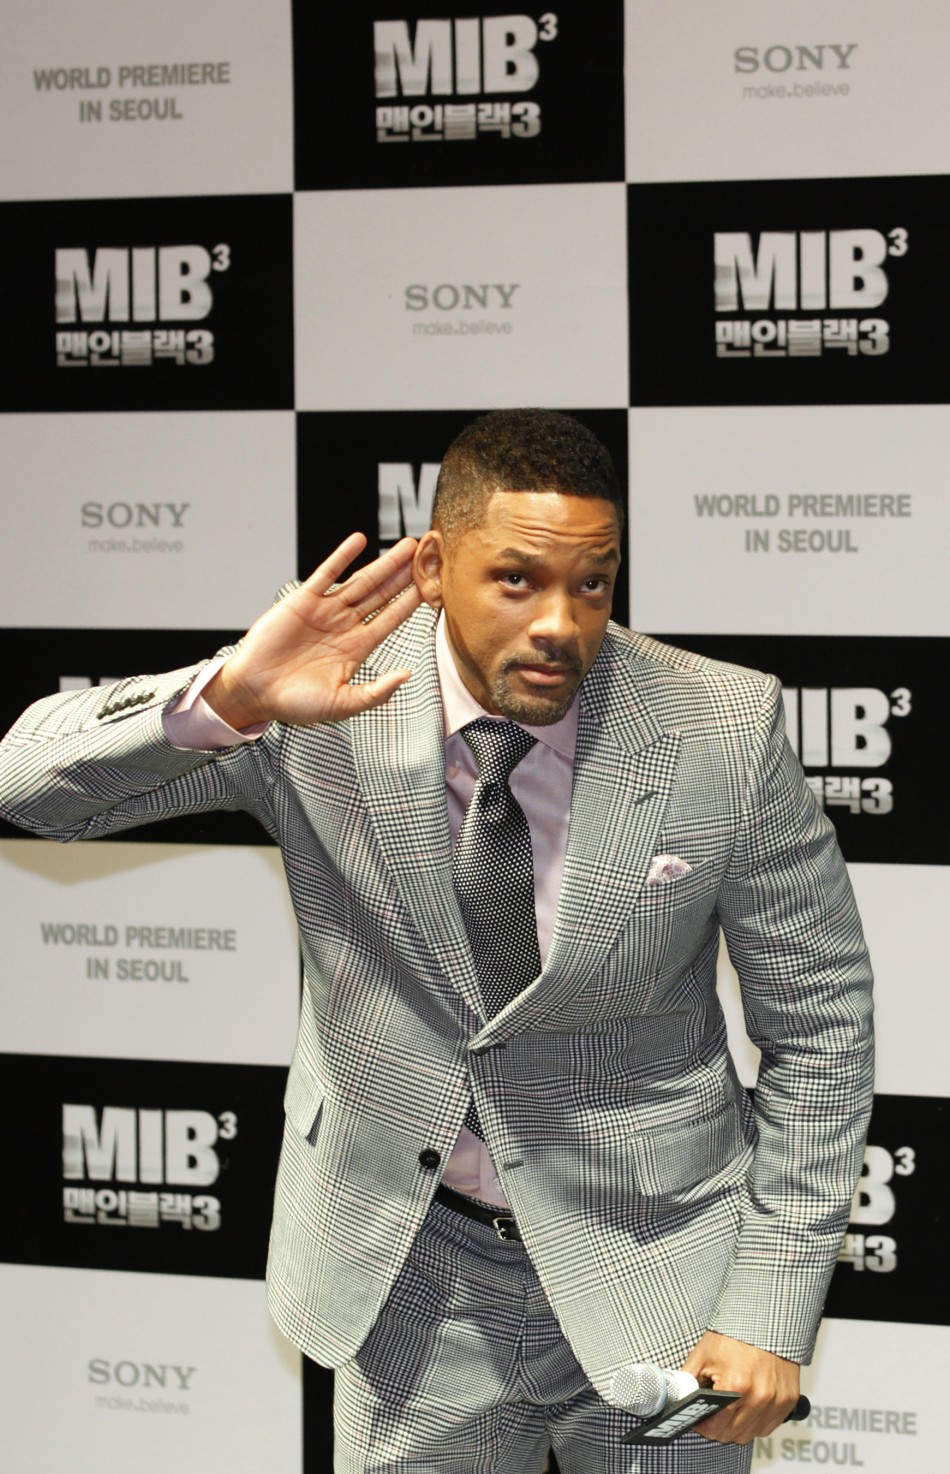 Will Smith gestures during the world premiere, a red carpet event, for his film quotMen in Black IIIquot at a theatre in Seoul